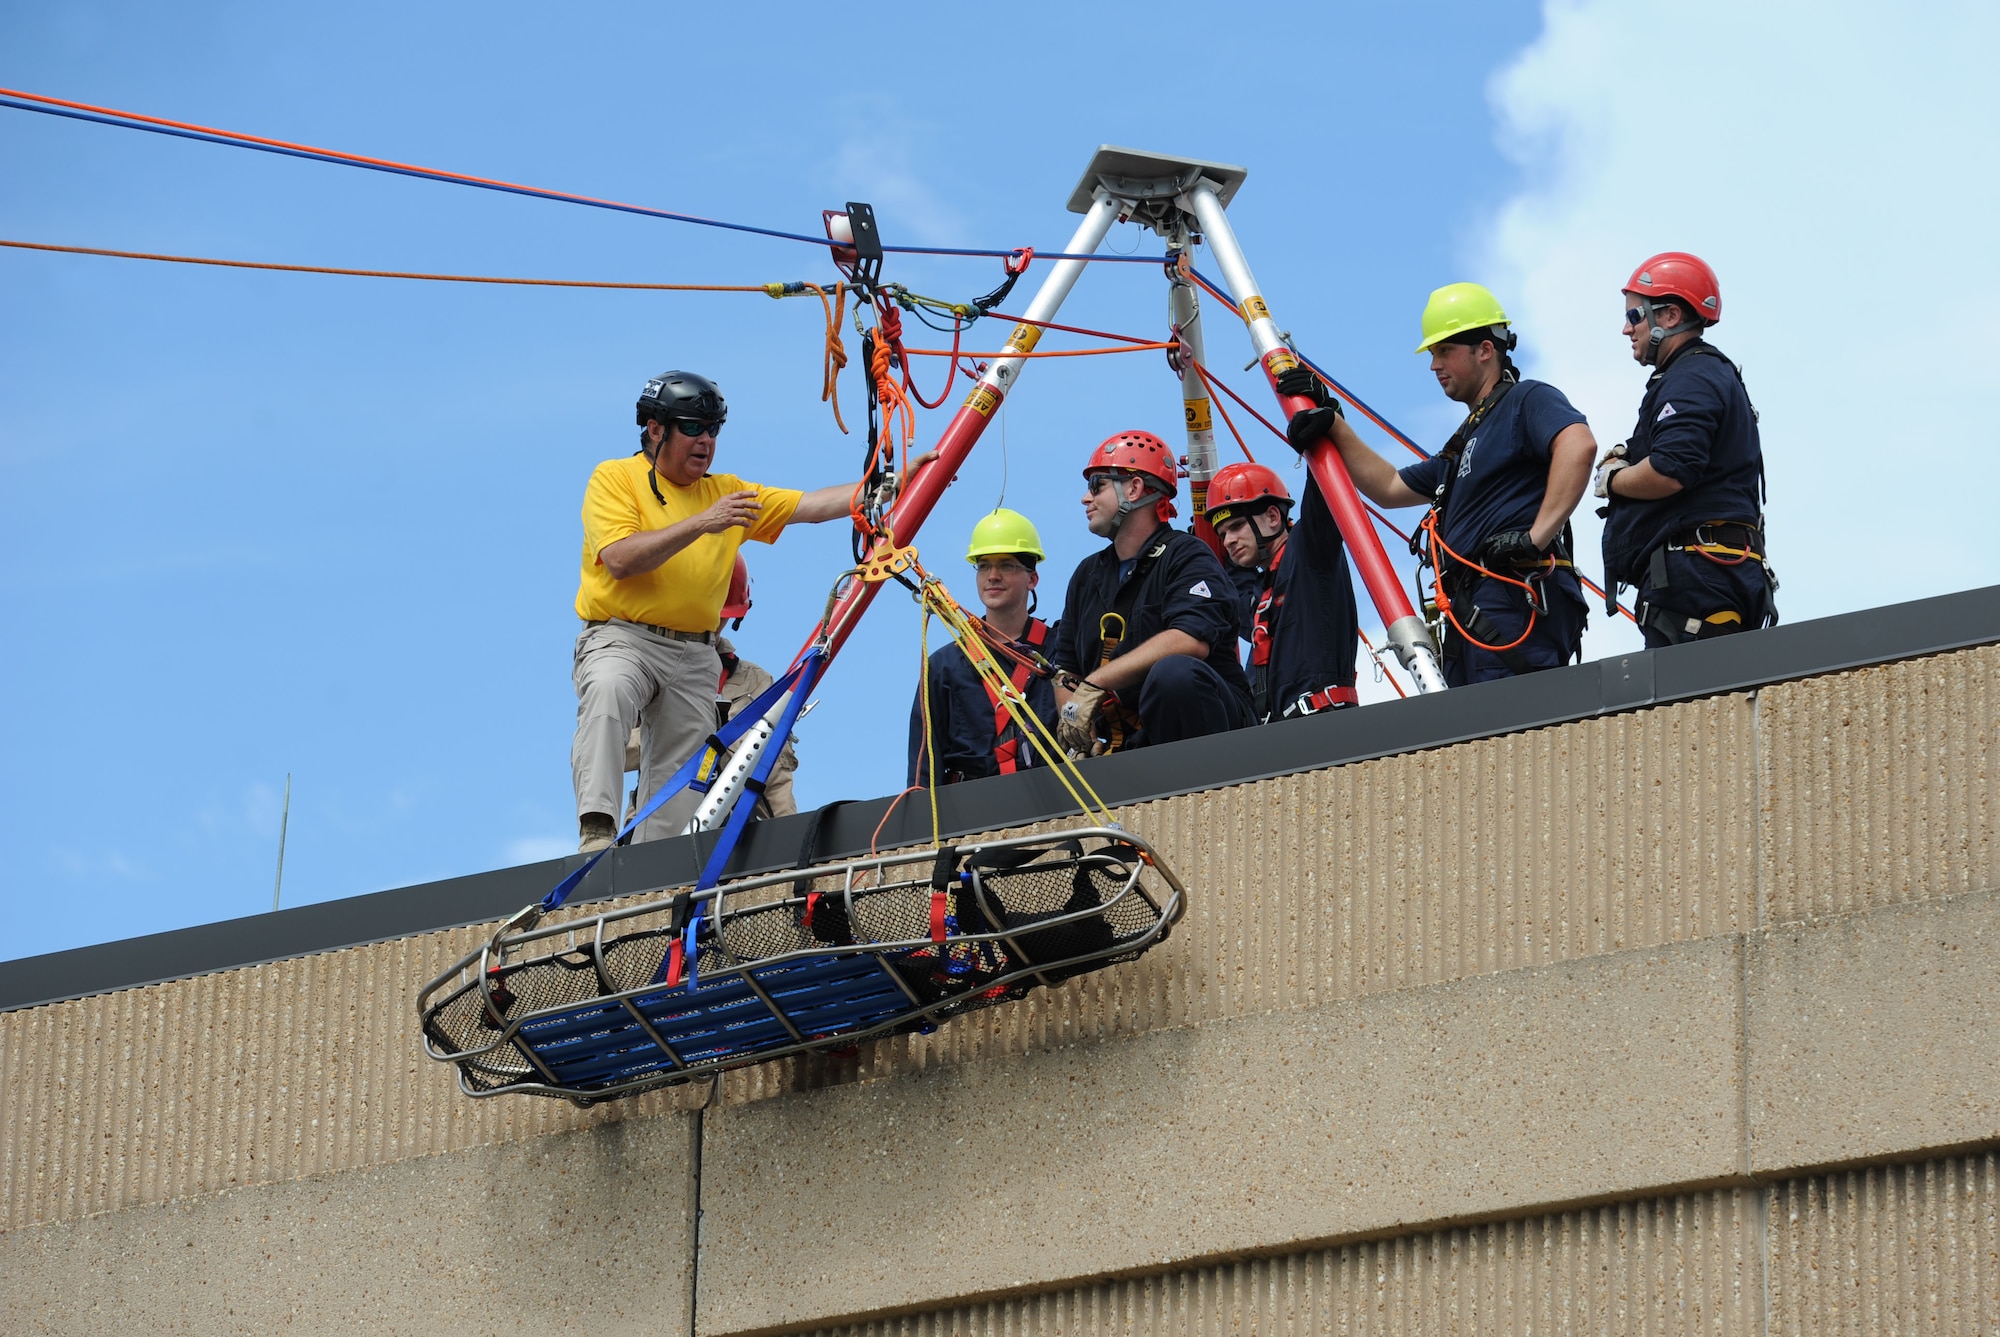 Richard Alfes, instructor and co-owner of Spec Rescue, provides instruction to members of the Keesler and Biloxi Fire Department as they participate in a controlled descent exercise atop of the Weather Training Complex during rope rescue operations training June 14, 2017, on Keesler Air Force Base, Miss. Keesler hosted the advanced rescue certification training course, which consisted of confined space rescue, high and low angle rescue and stokes basket rescue operations. (U.S. Air Force photo by Kemberly Groue)